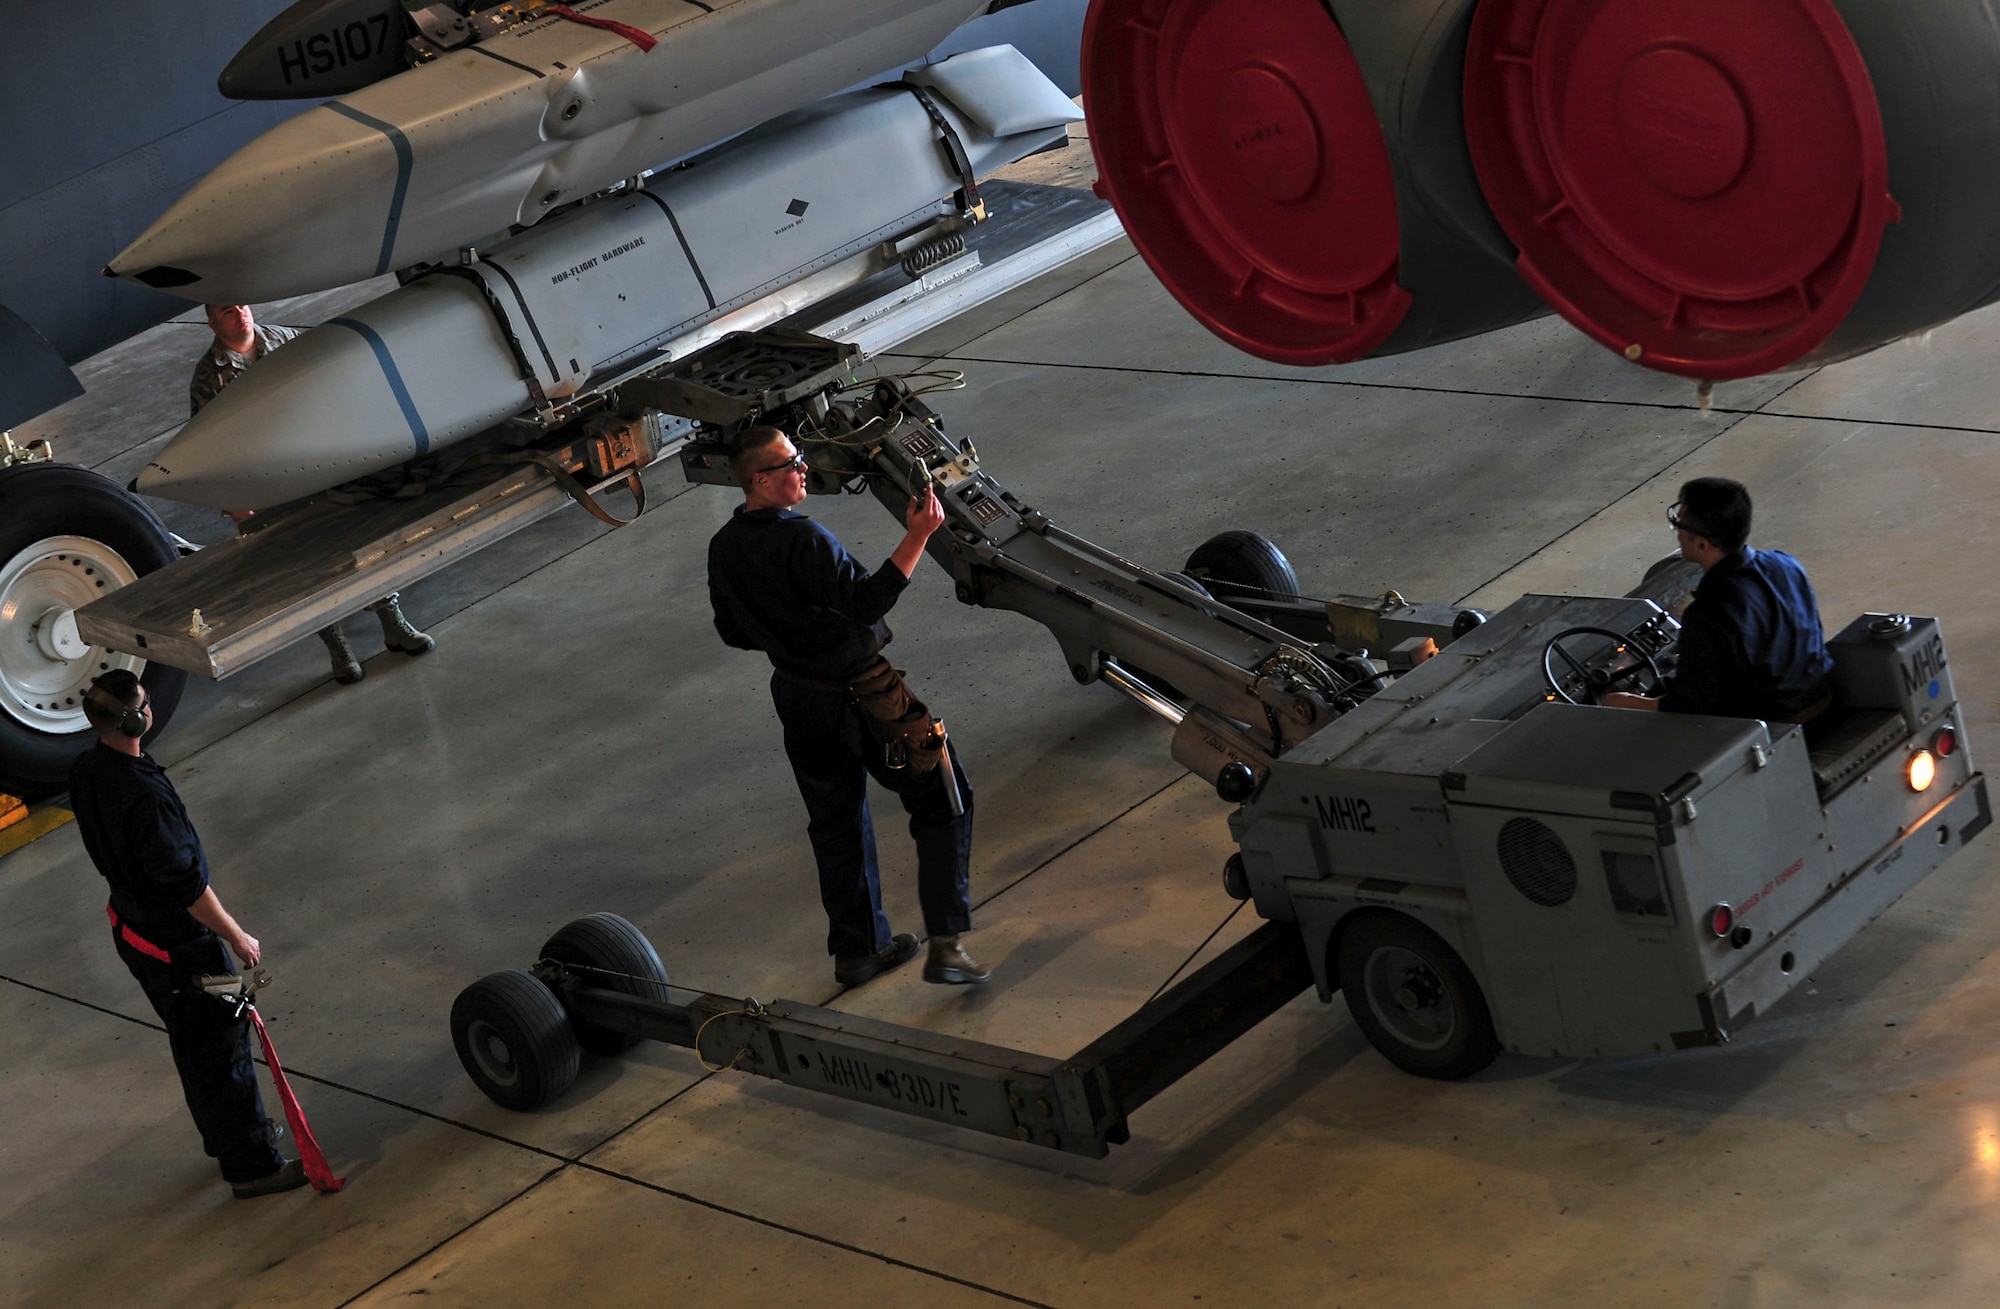 Members of the 5th Aircraft Maintenance Squadron maneuver a “jammer” under the wing of a B-52H Stratofortress at Minot Air Force Base, N.D., Aug. 24, 2015. The group was required to load four weapons onto the aircraft as part of Air Force Global Strike Command’s Global Strike Challenge Competition -- a task they completed in approximately 60 minutes. (U.S. Air Force photo/Senior Airman Stephanie Morris)